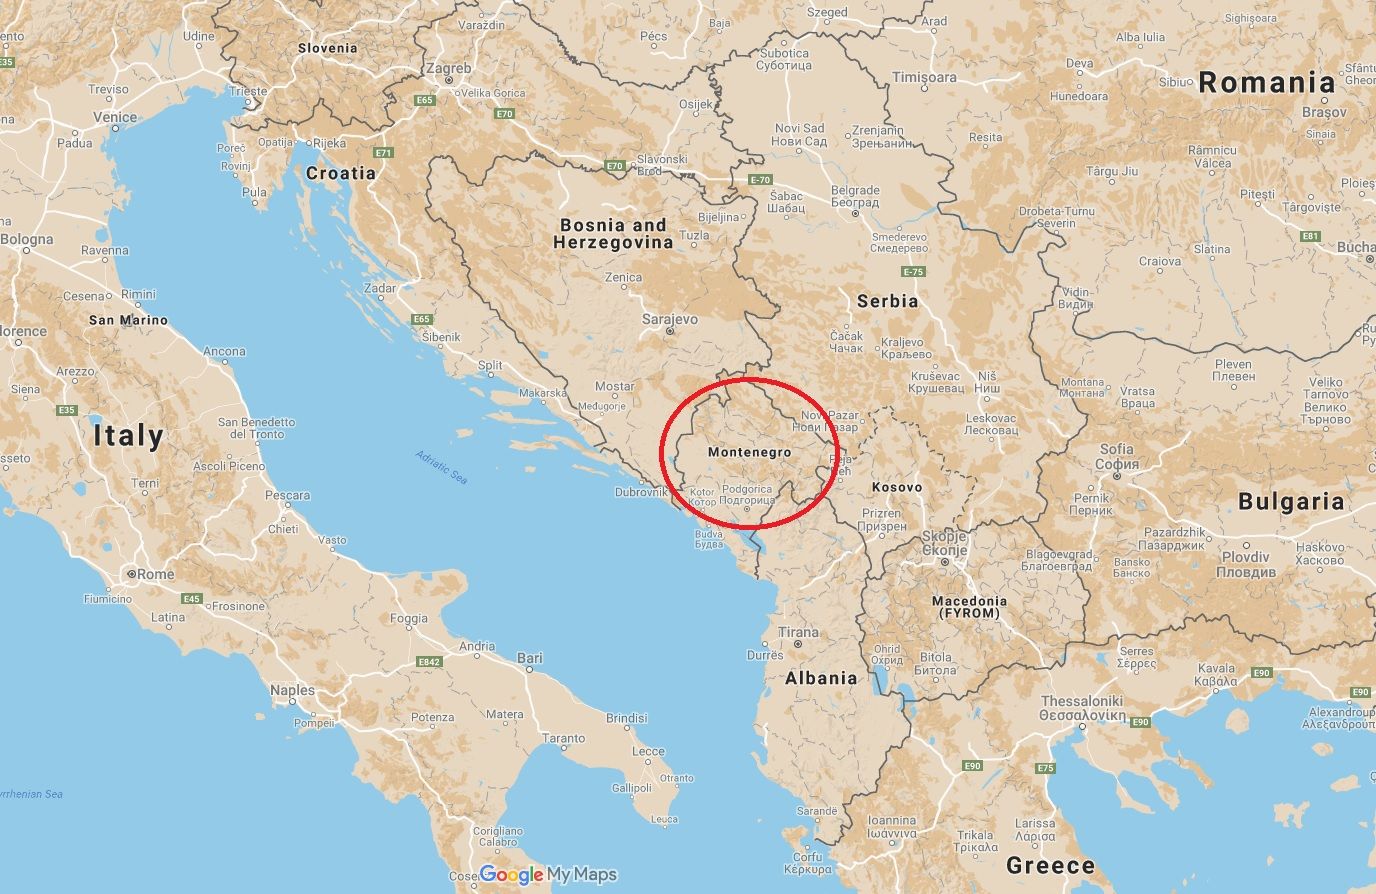 Where Is Montenegro On The Map Of Europe_ | United States Map - Europe Map